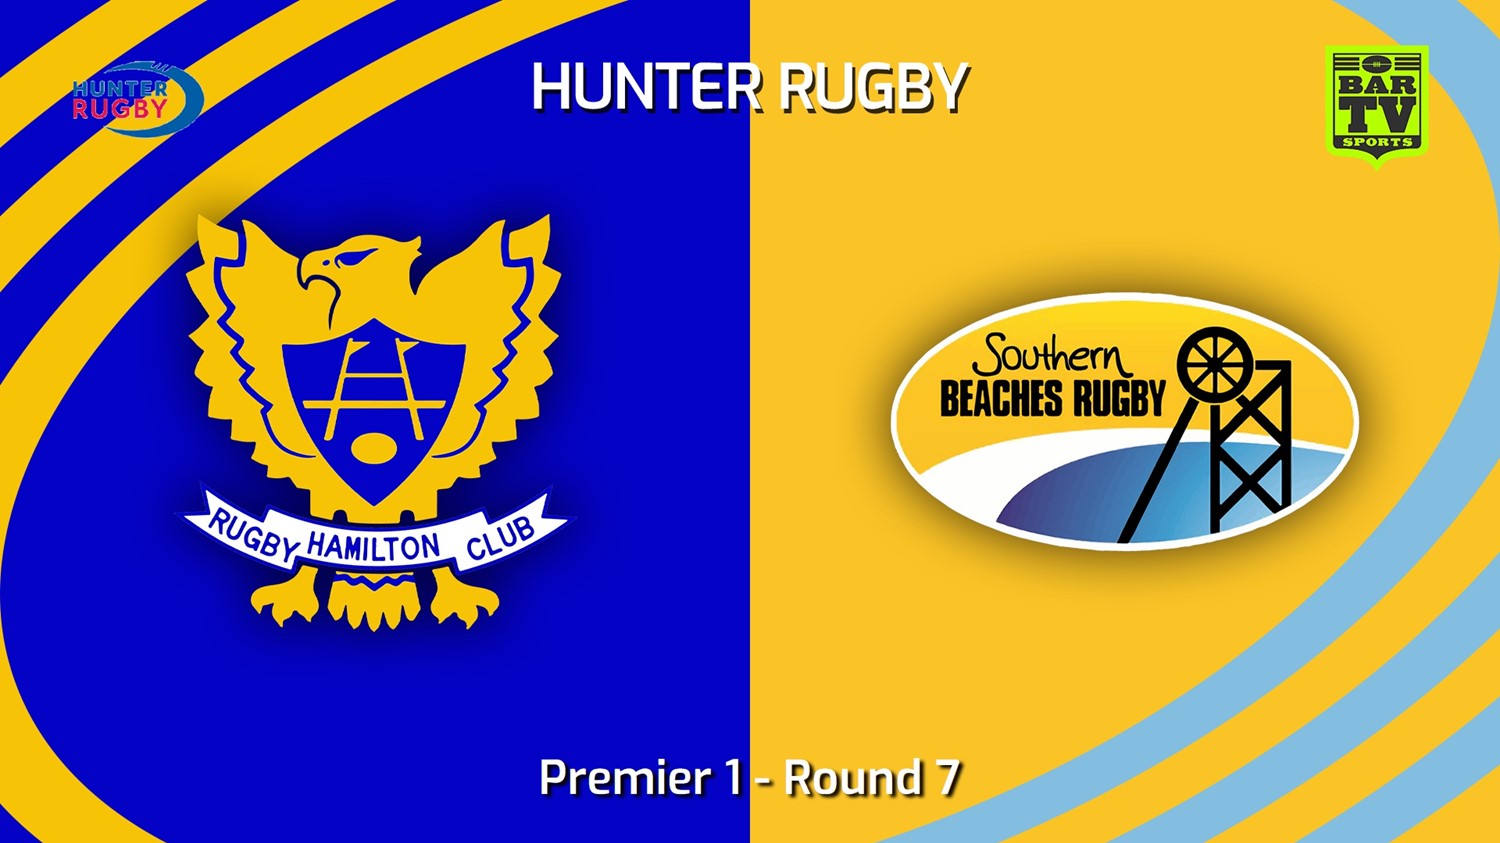 240525-video-Hunter Rugby Round 7 - Premier 1 - Hamilton Hawks v Southern Beaches Slate Image